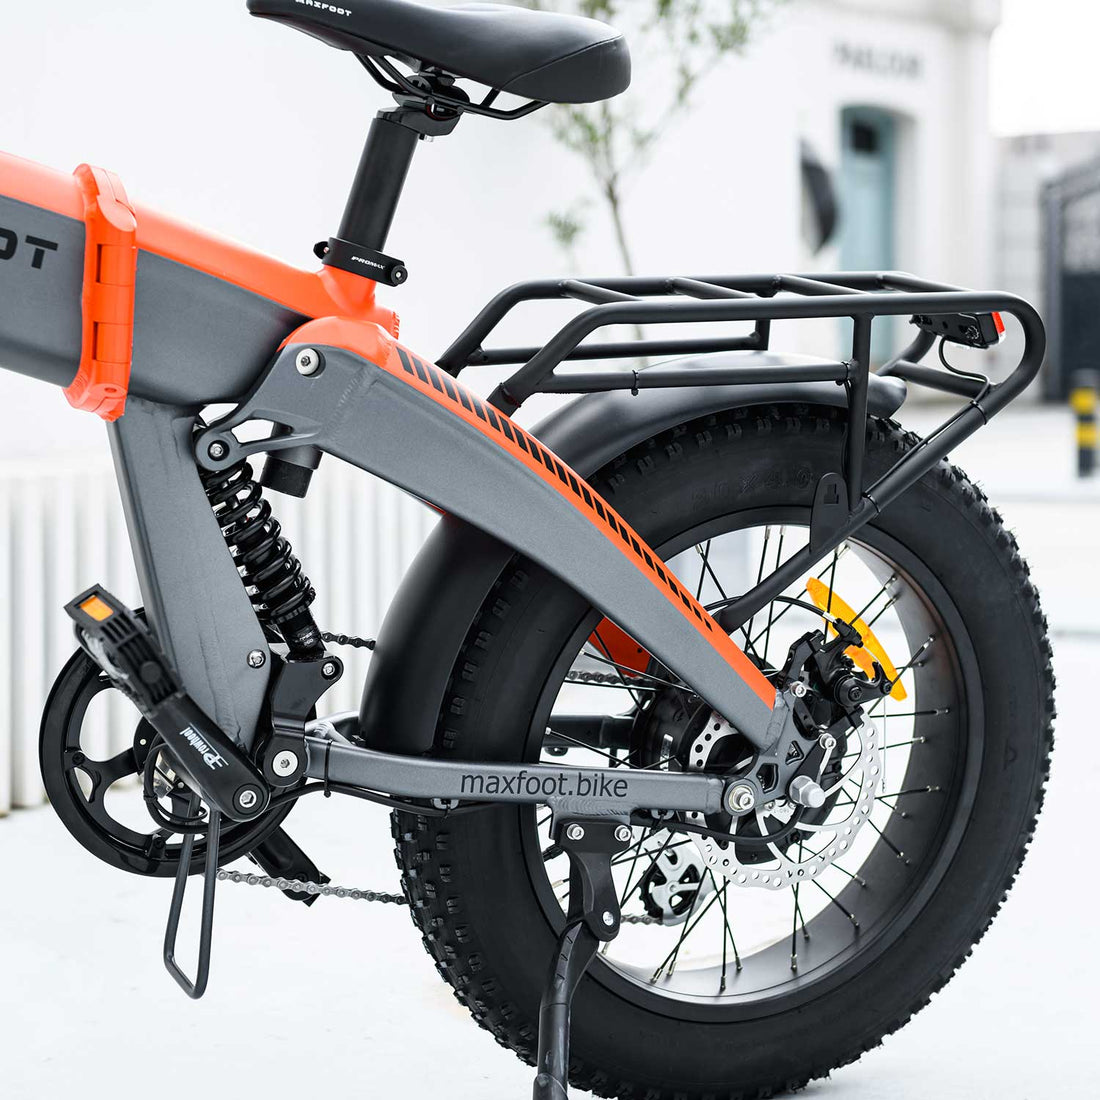 From Pedal-Assist to High-Speed: The Different Classes of E-bikes and Their Speeds